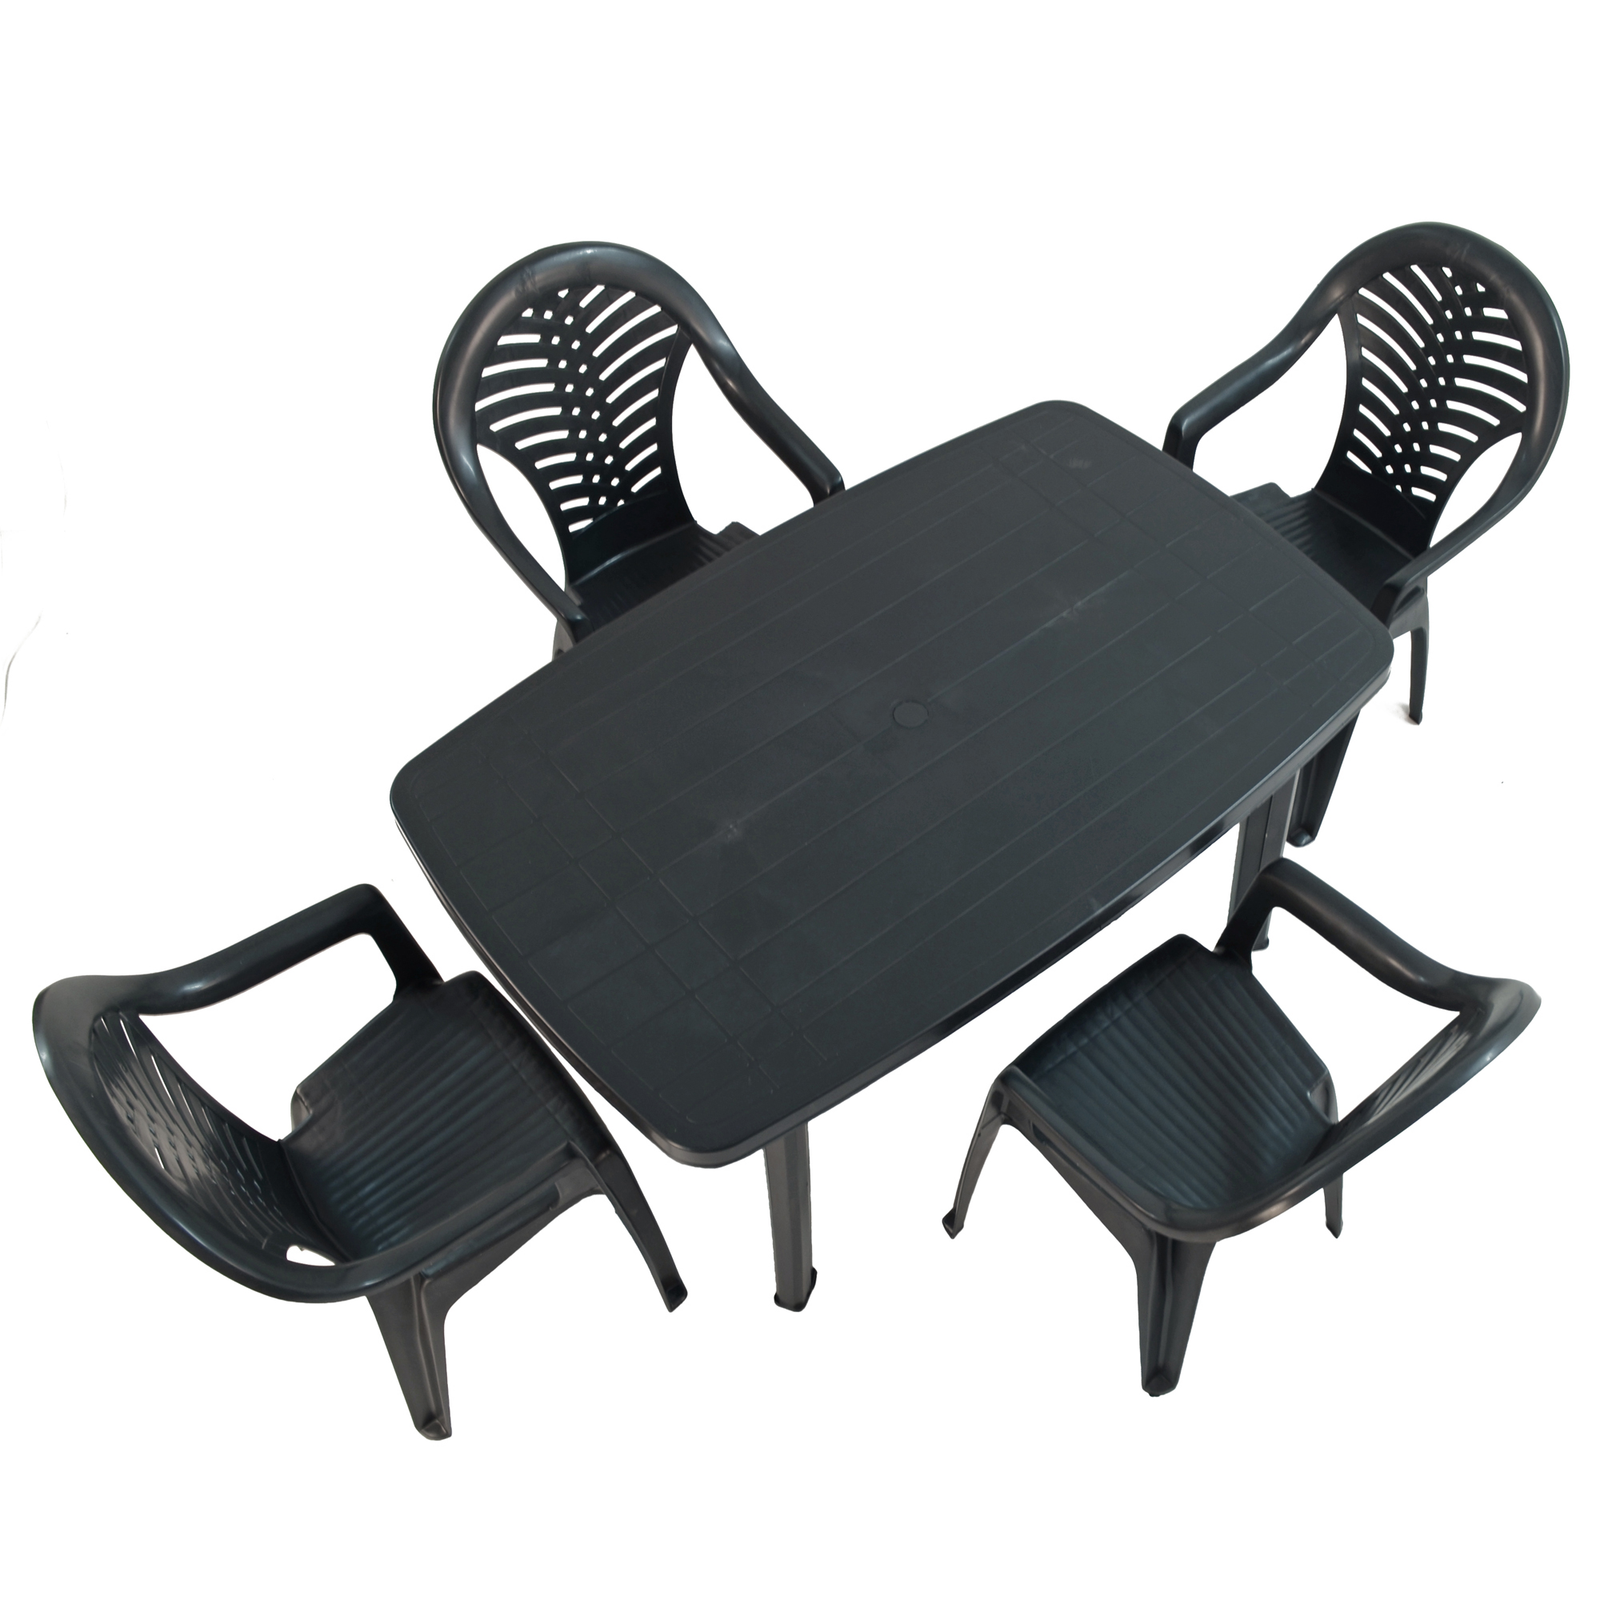 Trabella Rimini Rectangular Table With 4 Pineto Chairs Set Anthracite Grey Dining Sets Trabella Default Title  